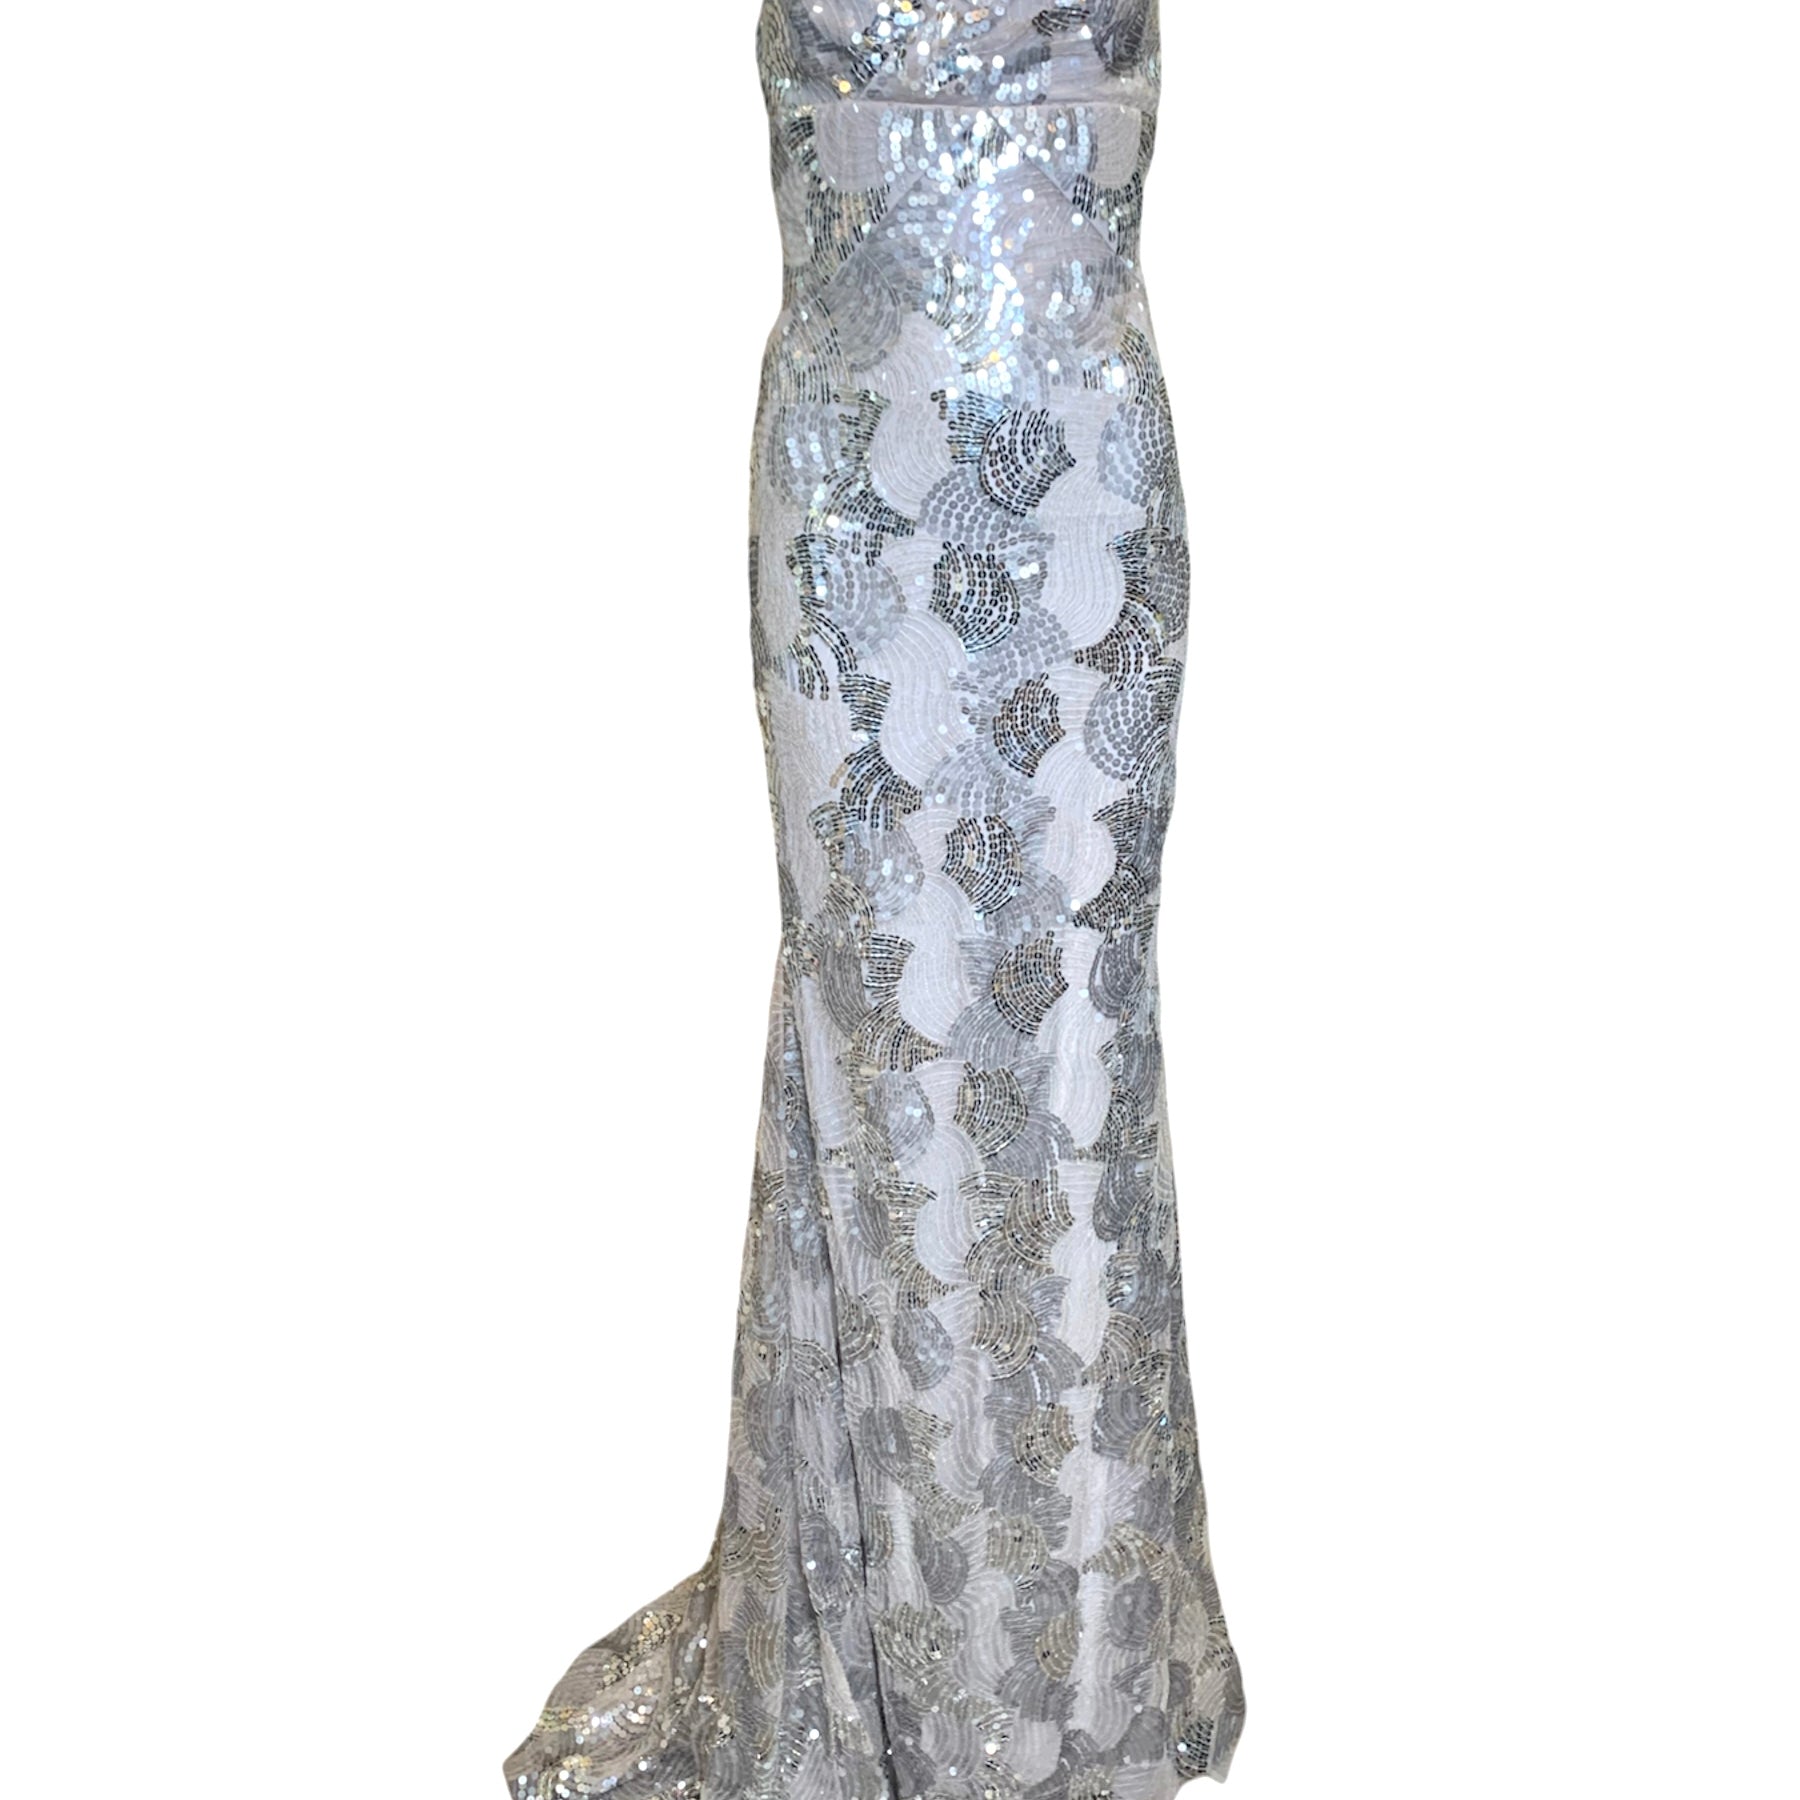 Lorena Sarbu Red Carpet Y2K Silver Sequin Strapless Gown FRONT 1 of 6